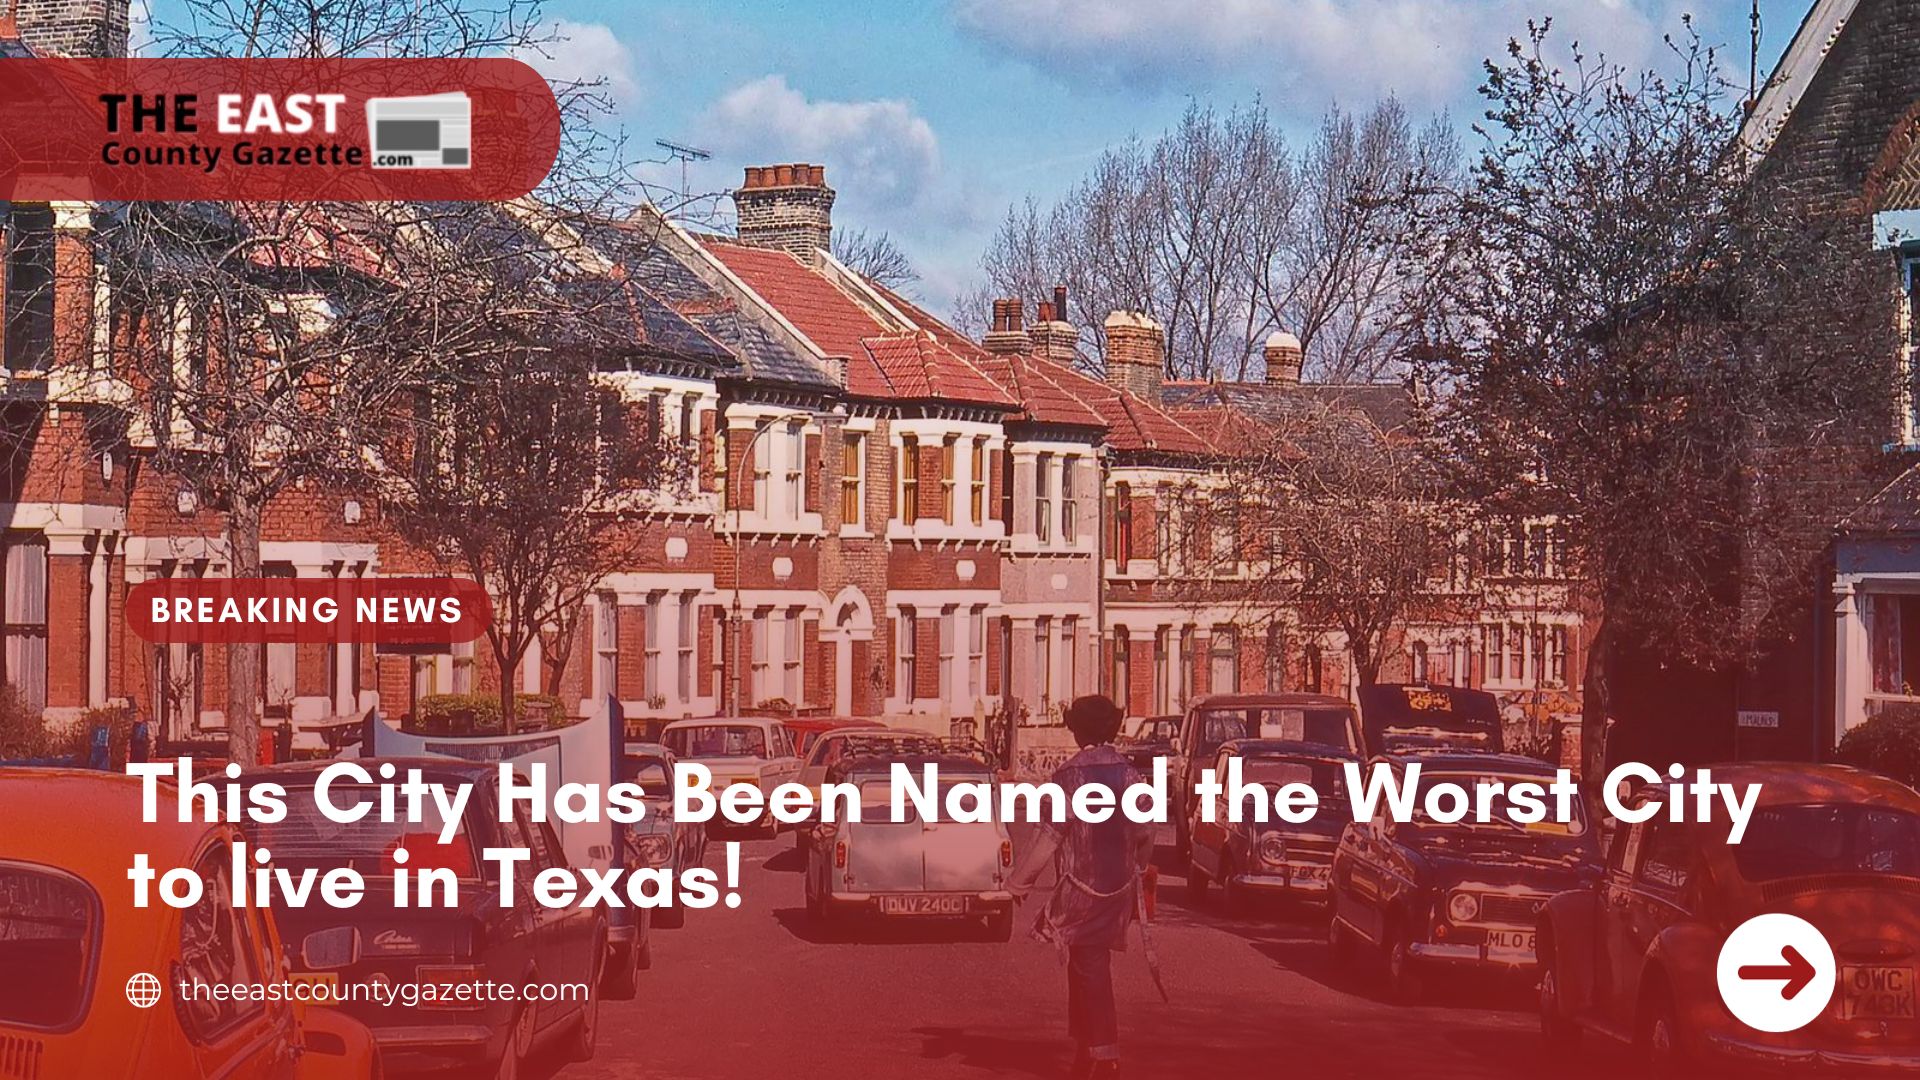 This City Has Been Named the Worst City to live in Texas!